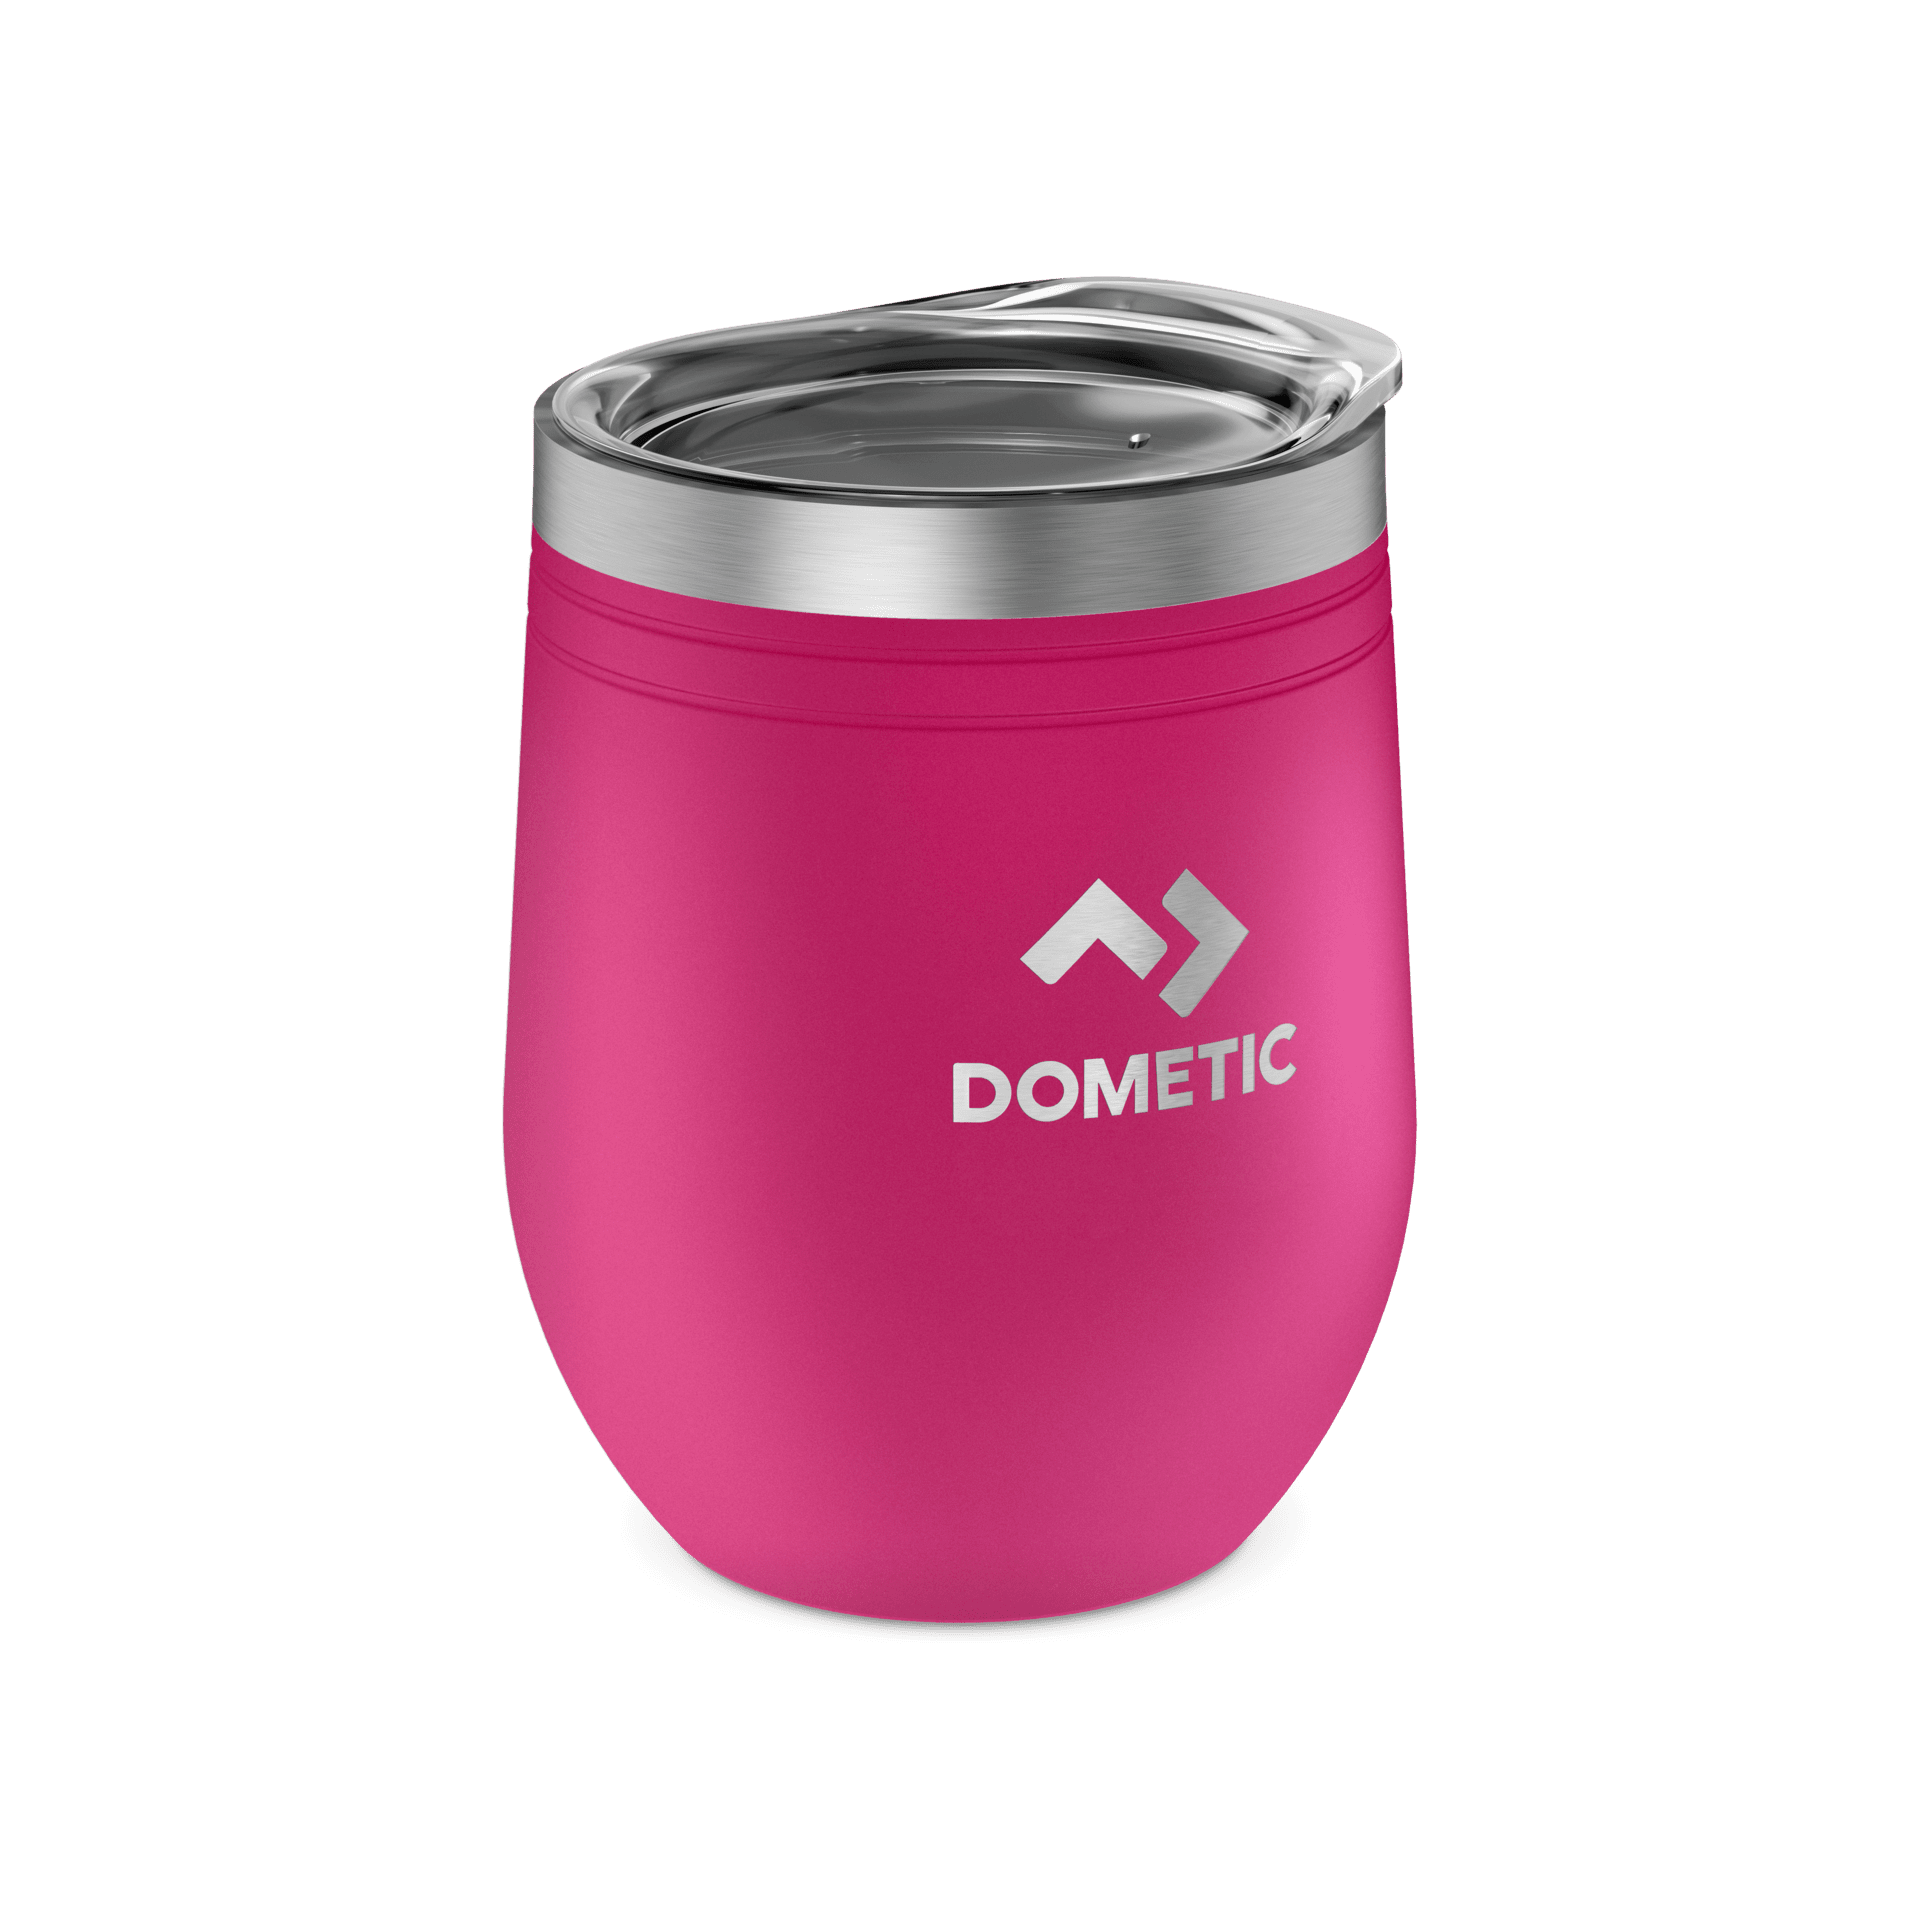 Dometic Thermo Wine Tumbler 300mL -Orchid